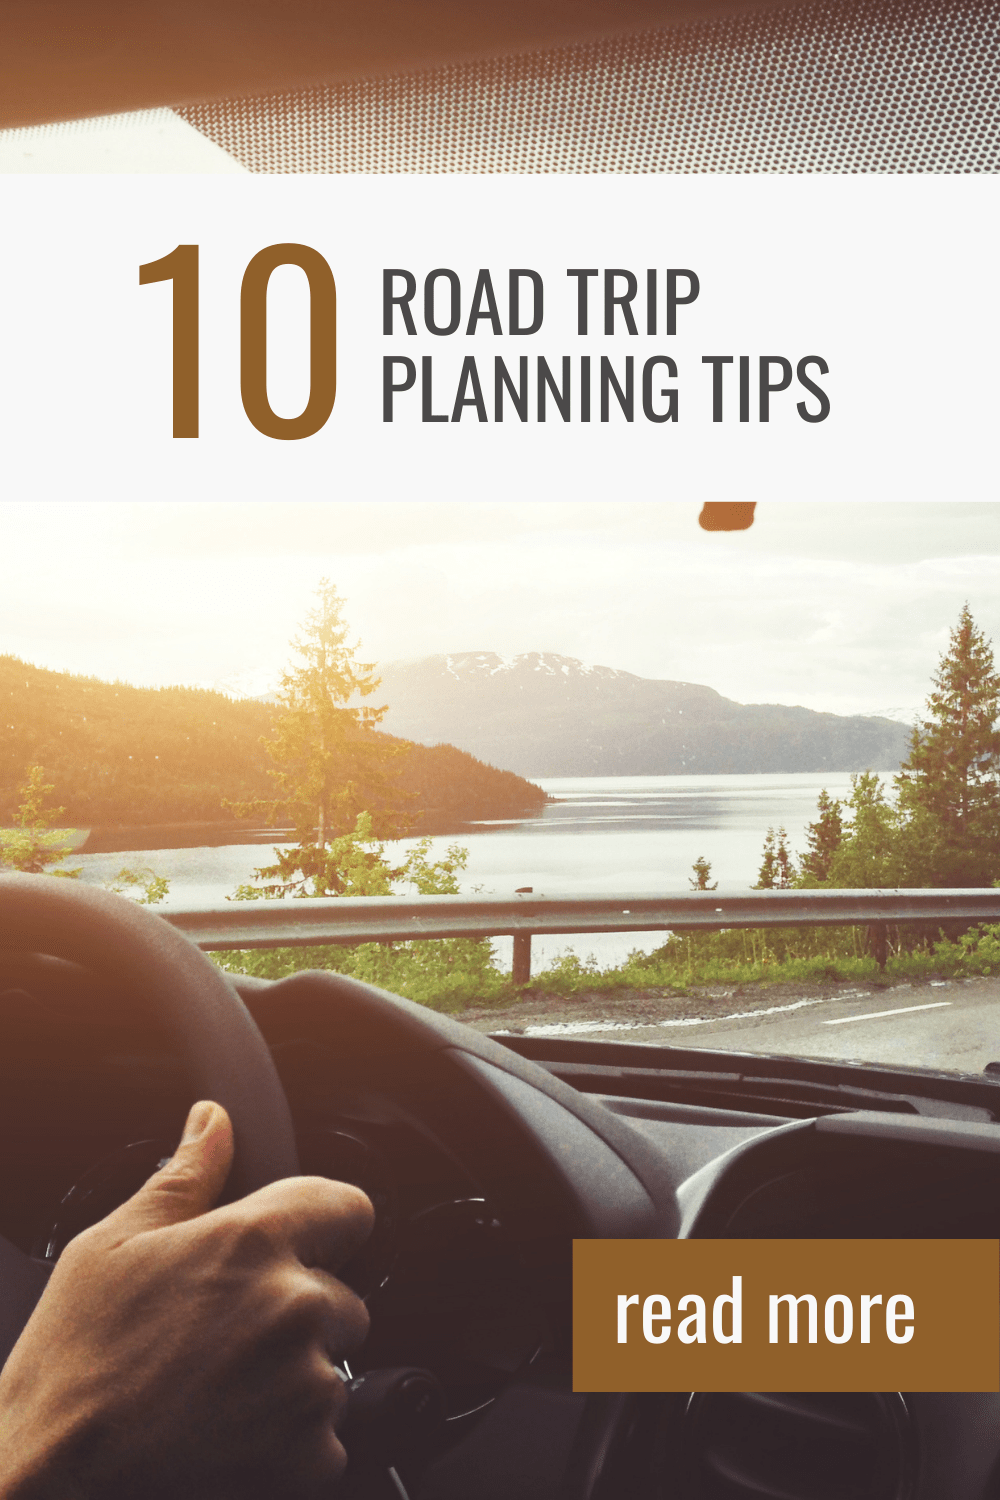 Are you planning to hit the road, get in your car, and take the adventure of a lifetime? Whether you’re driving across the country or across the state, whether you plan to hit all the National Parks or all the world’s largest things, planning a road trip can be a fun, but difficult, process. But don’t worry, if you’re stuck, these road trip planning tips will help! Here are our top 10 best tips to help you plan your next road trip! #RoadTrip #RoadTripTips #RoadTripPlanning #RoadTripPlanner